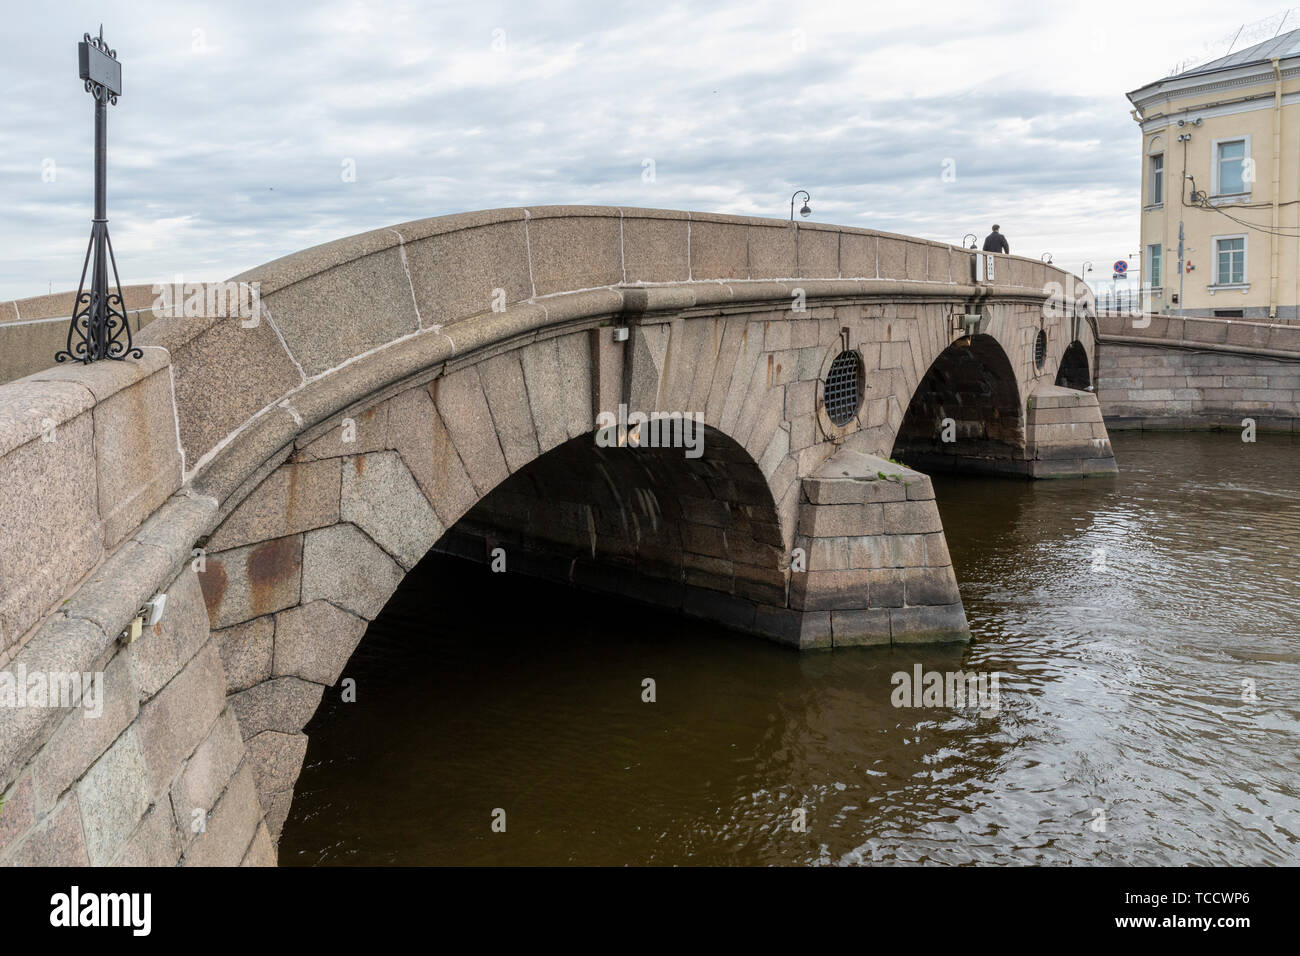 Lone pedestrian crossing stone arch bridge over Fontanka River at Summer Garden that connects Palace & Kutuzov Embankments, St Petersburg, Russia Stock Photo